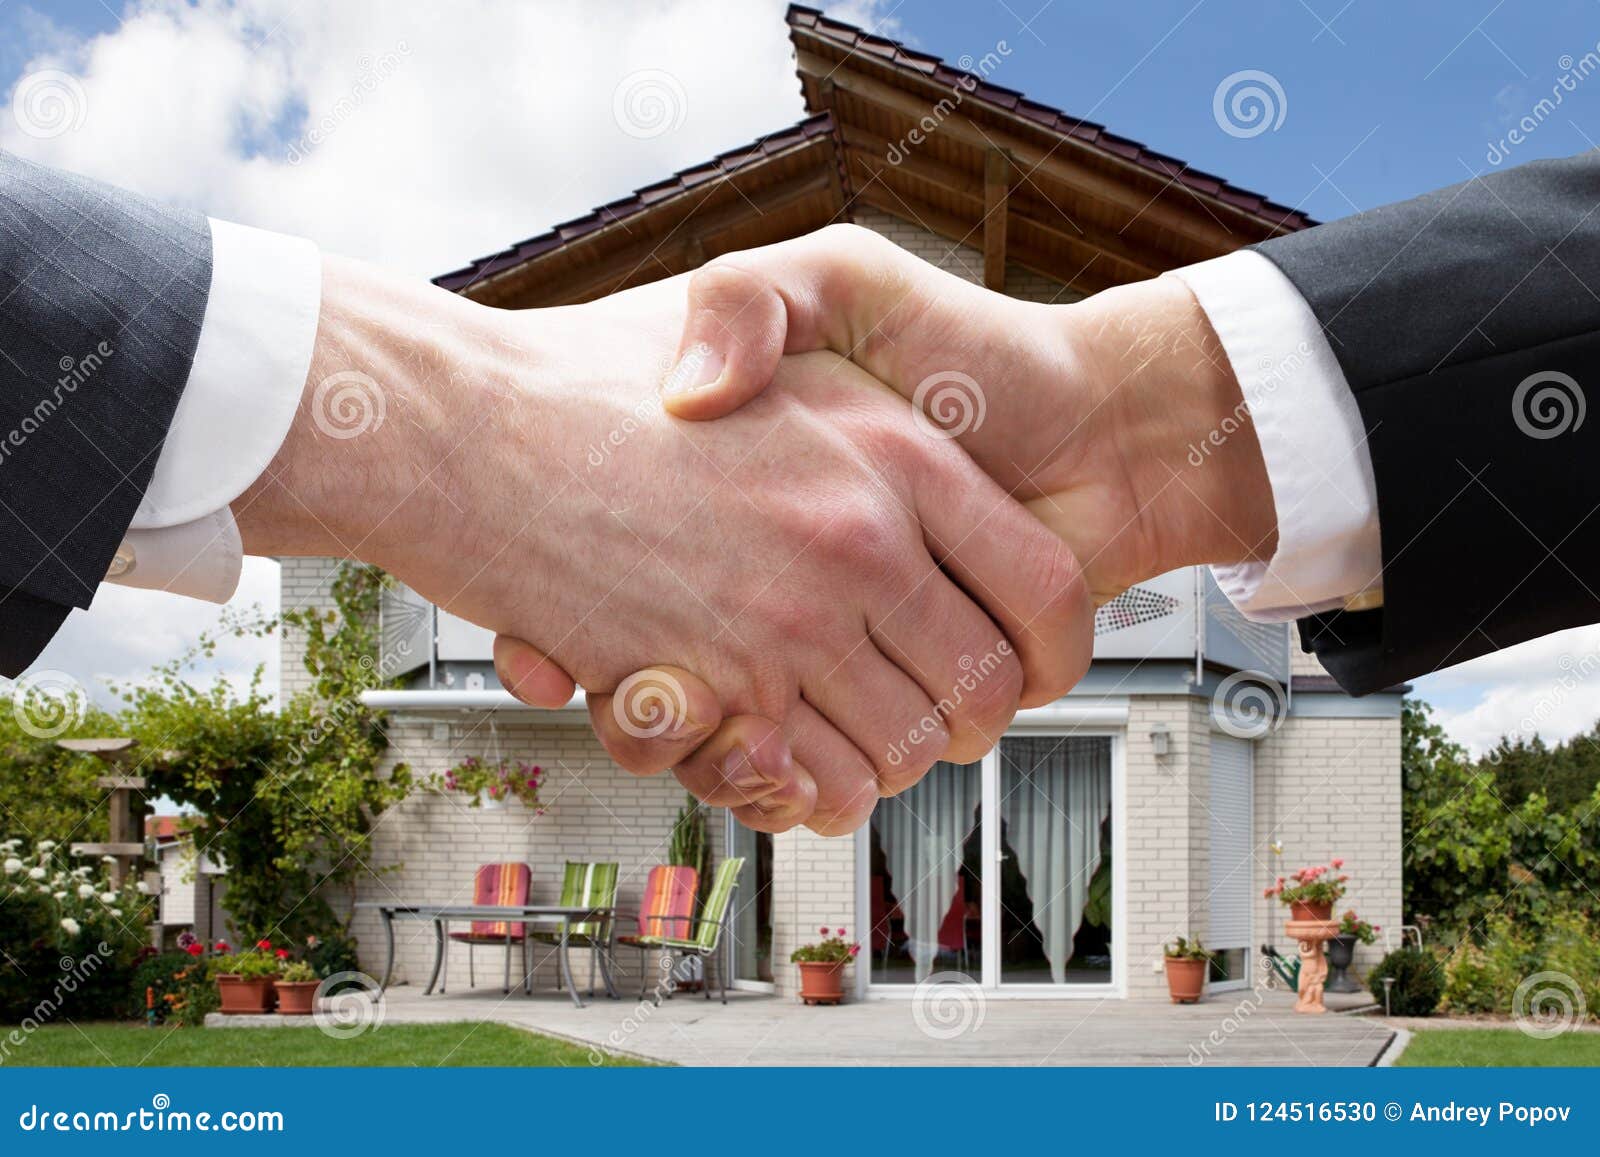 realtor shaking hands with client after selling house